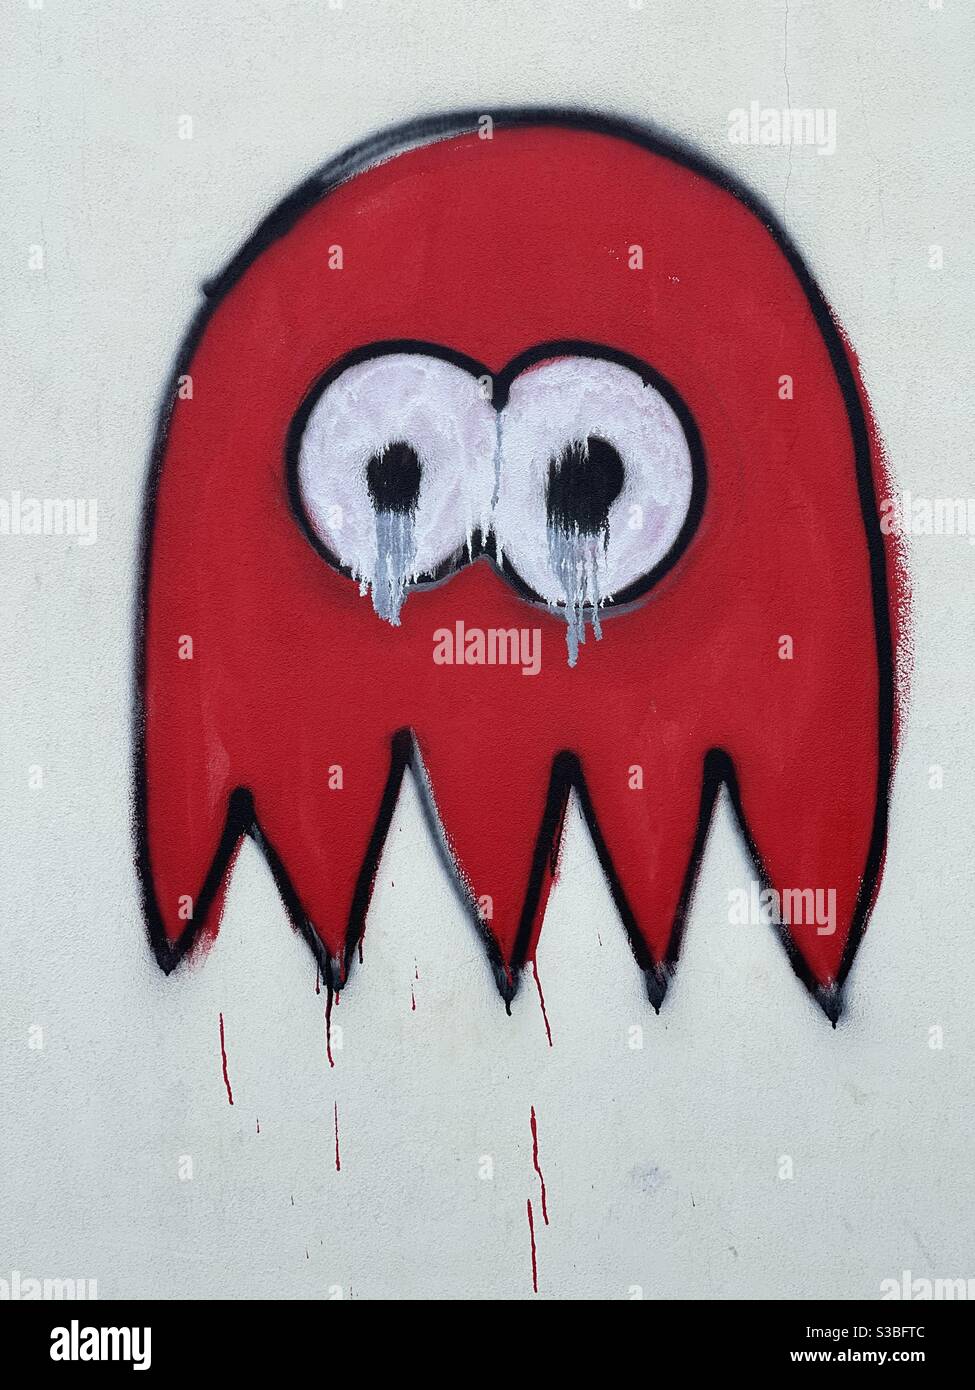 Crying creative emoticon painted on a wall Stock Photo